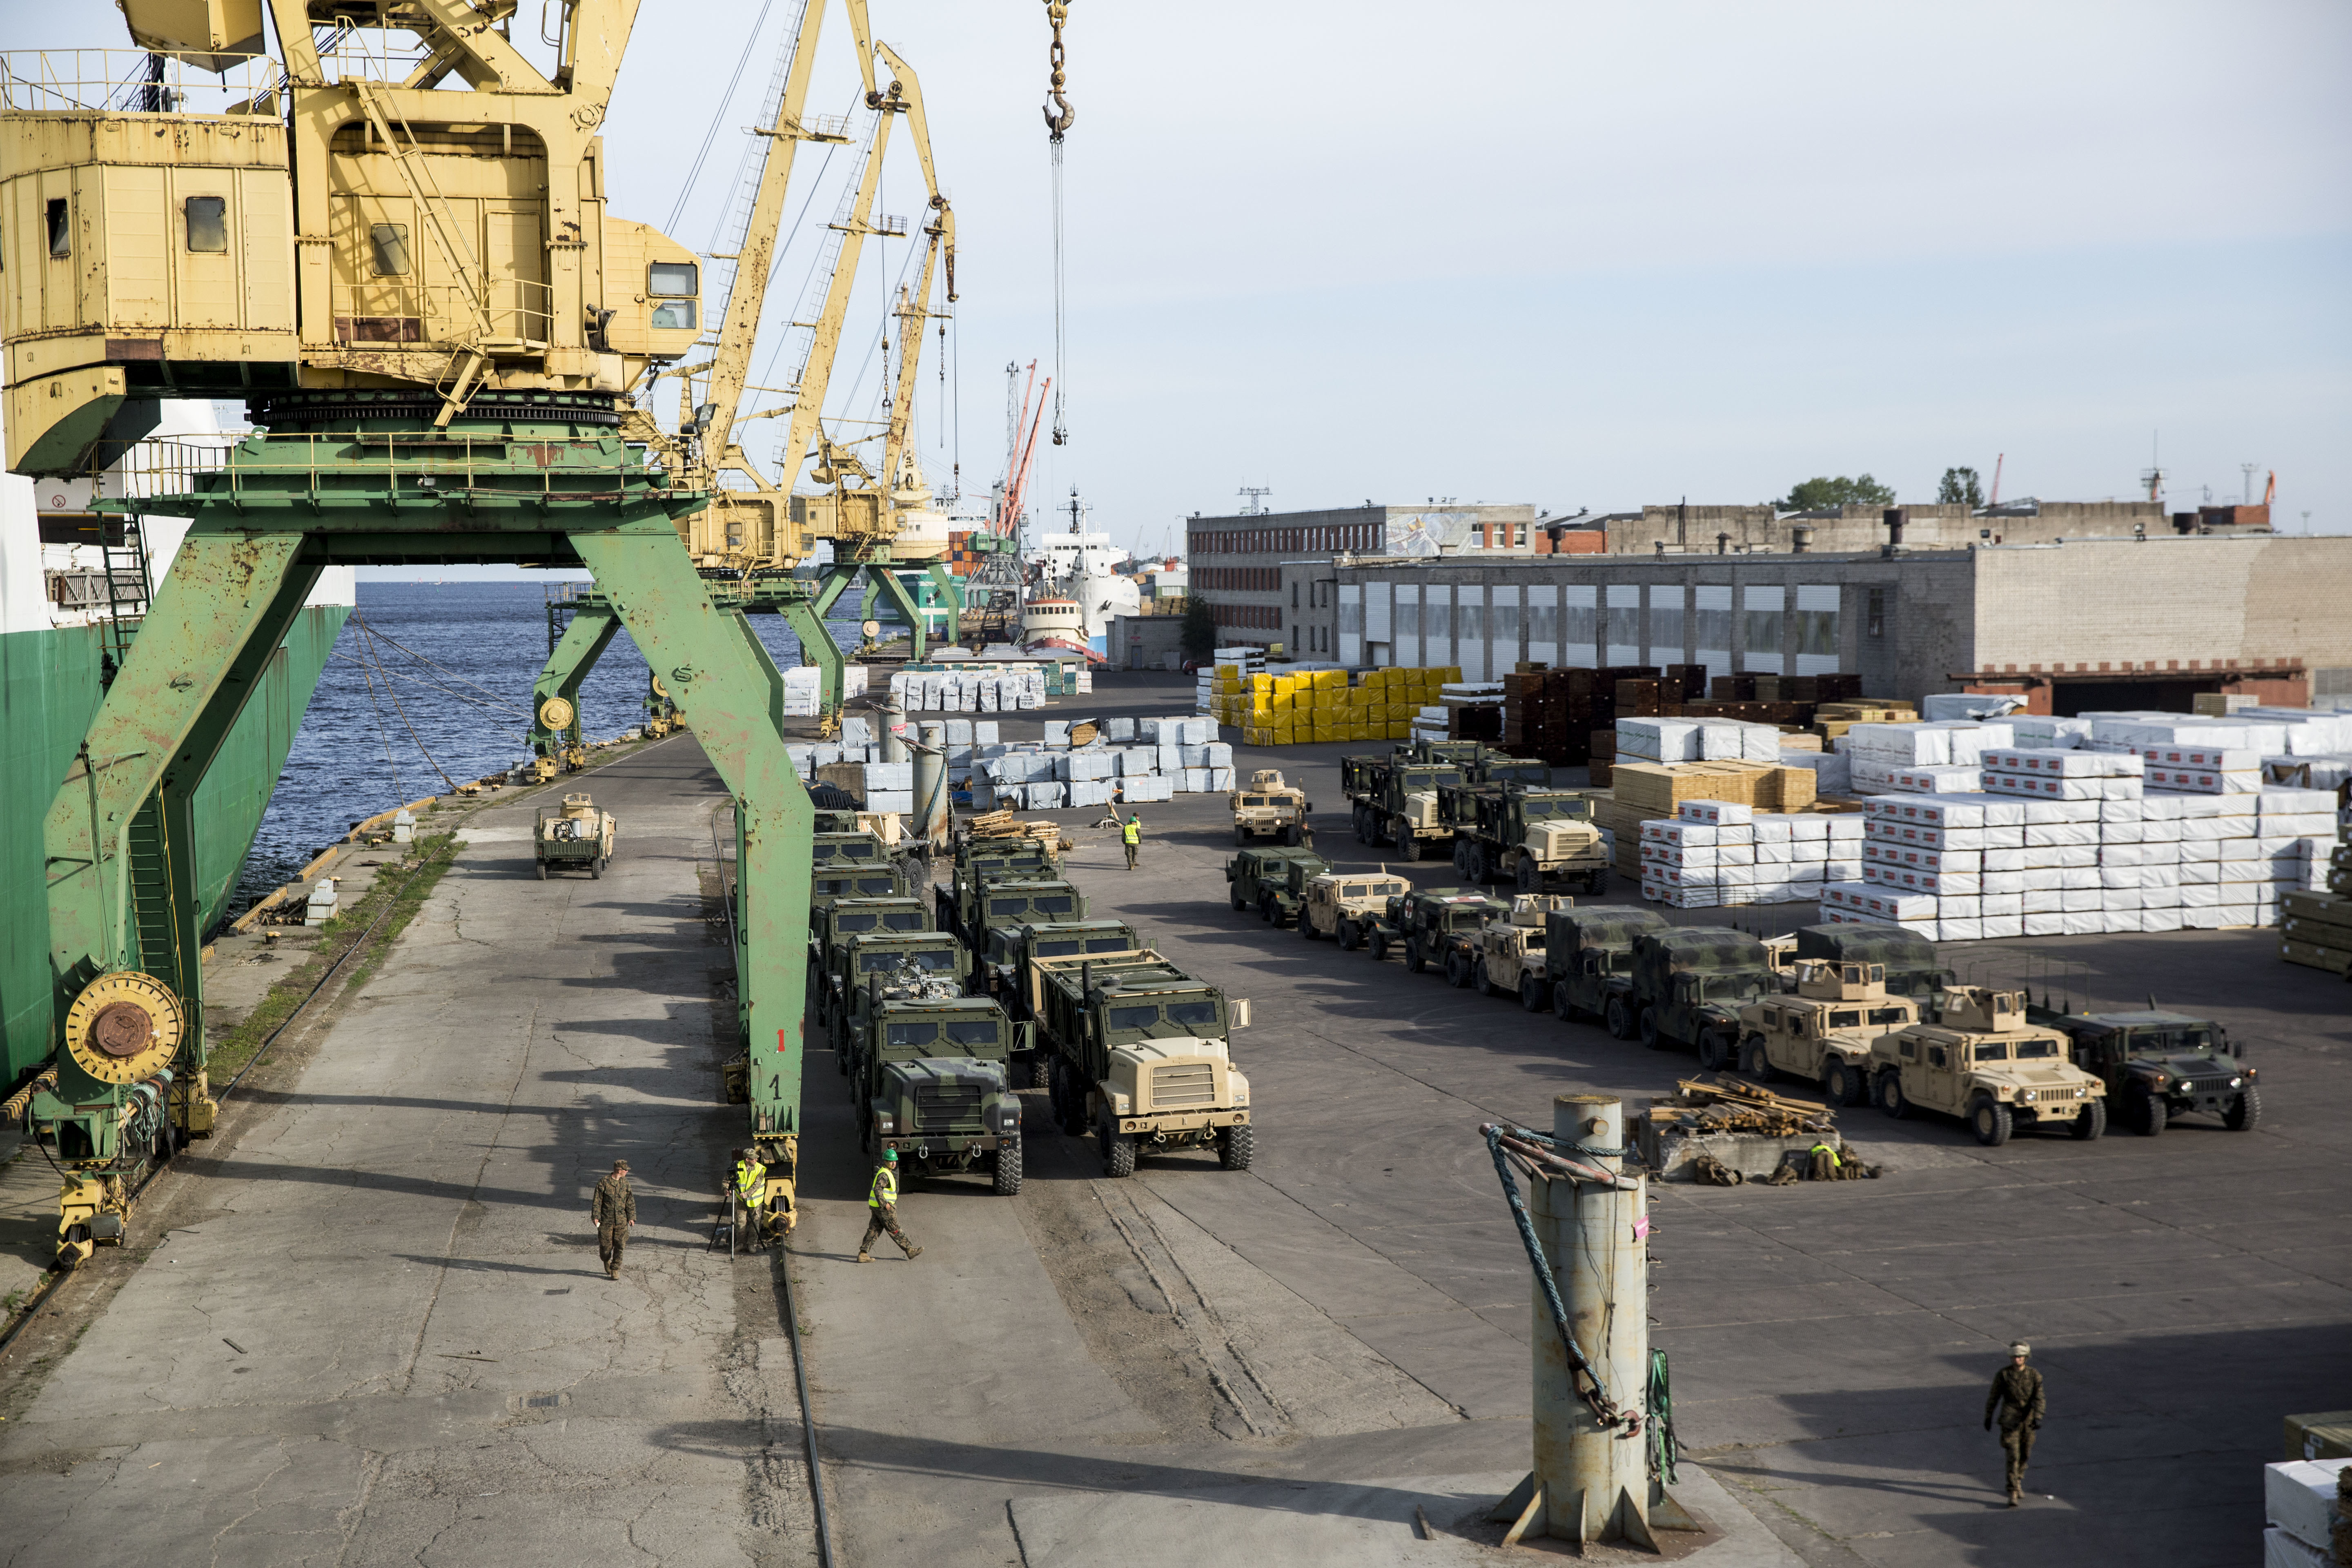 A fleet of military vehicles wait pier side in preparation of Exercise Saber Strike 16 in Riga, Latvia, June 4, 2016. The vehicles were transported by a British Roll-On, Roll-Off ship from Norway for the exercise. US Marine Corps photo.